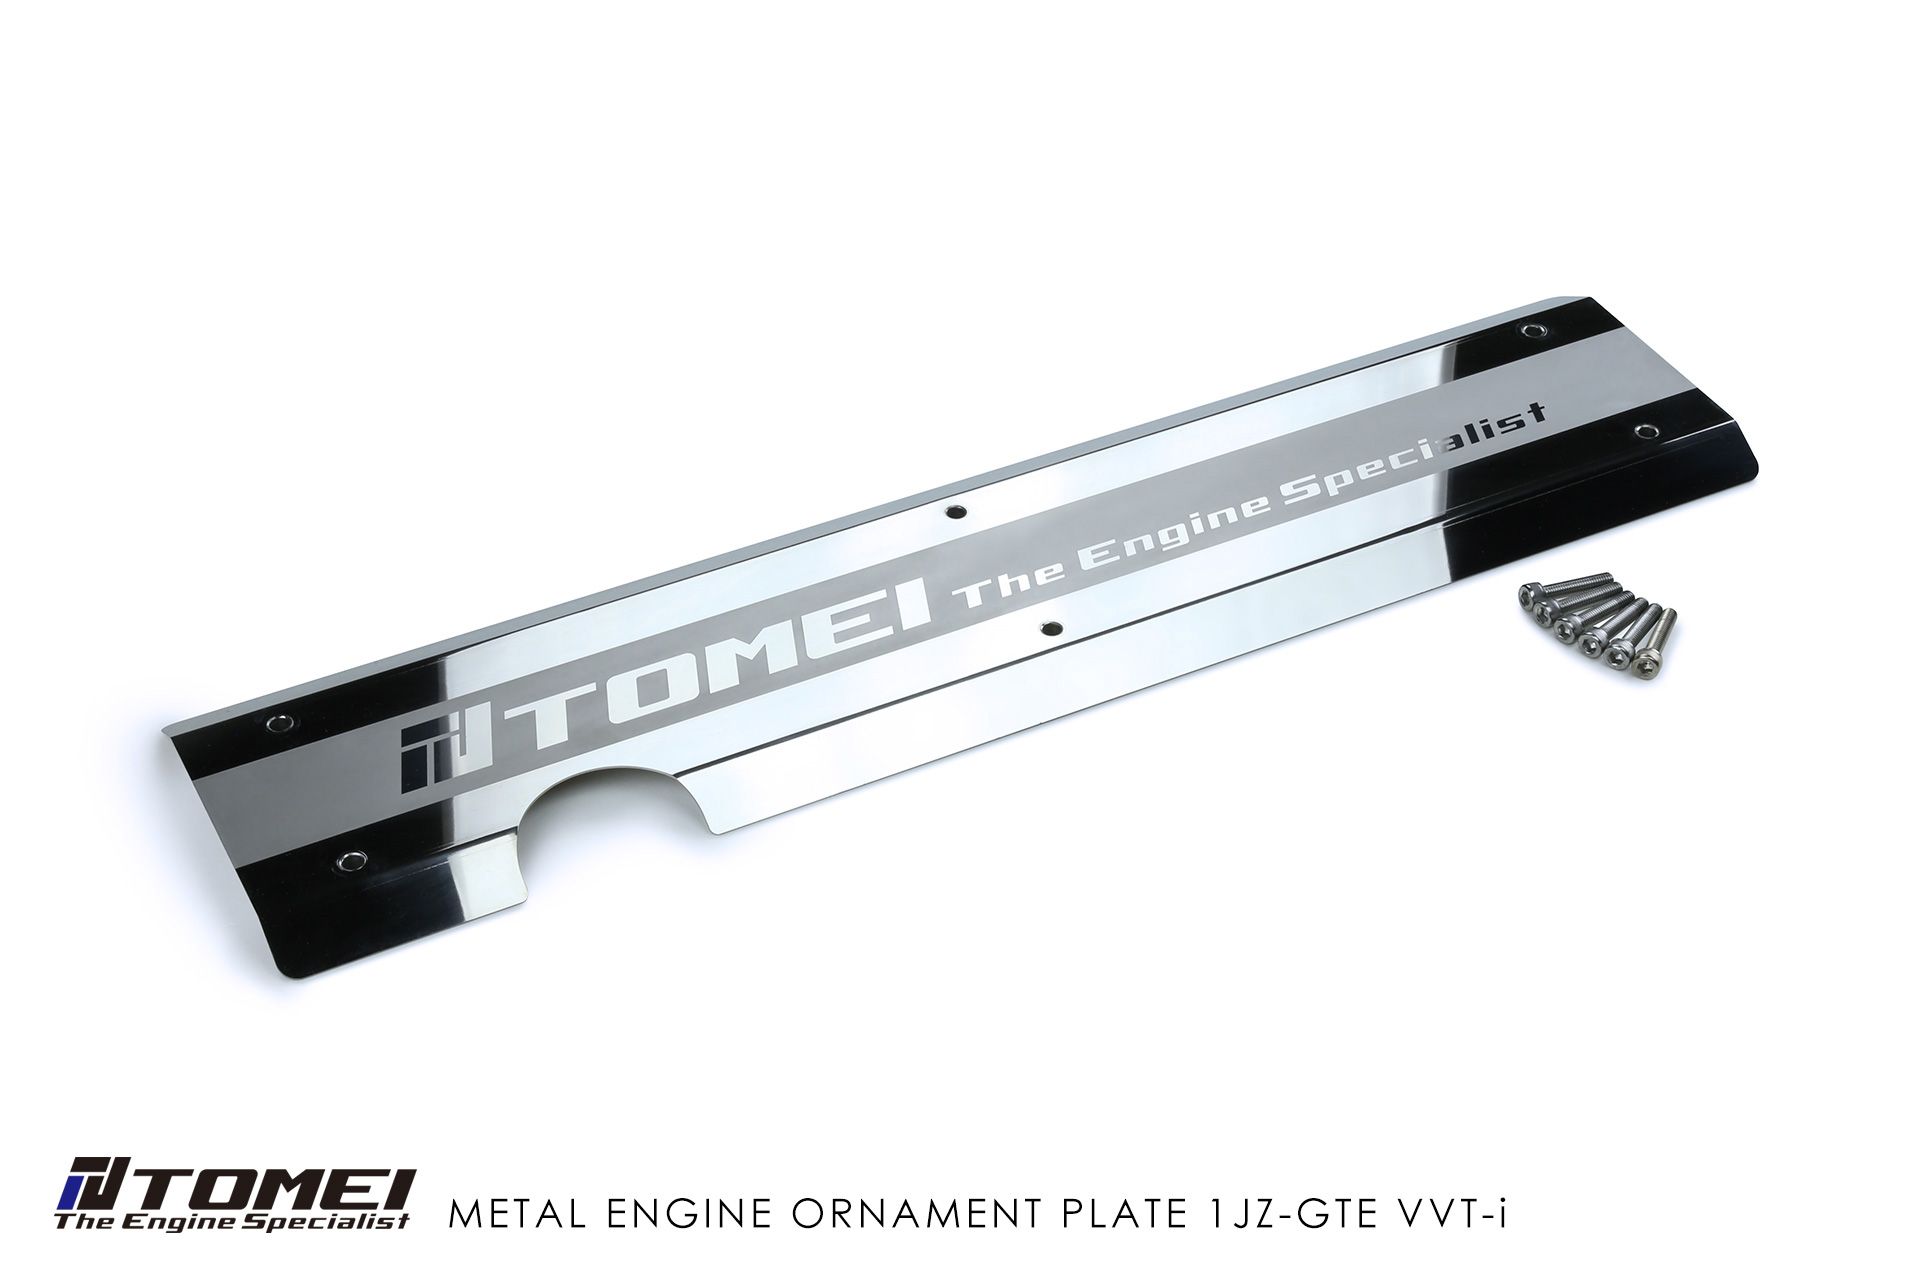 Tomei Metal Engine Ornament Plate - Toyota 1JZ-GTE